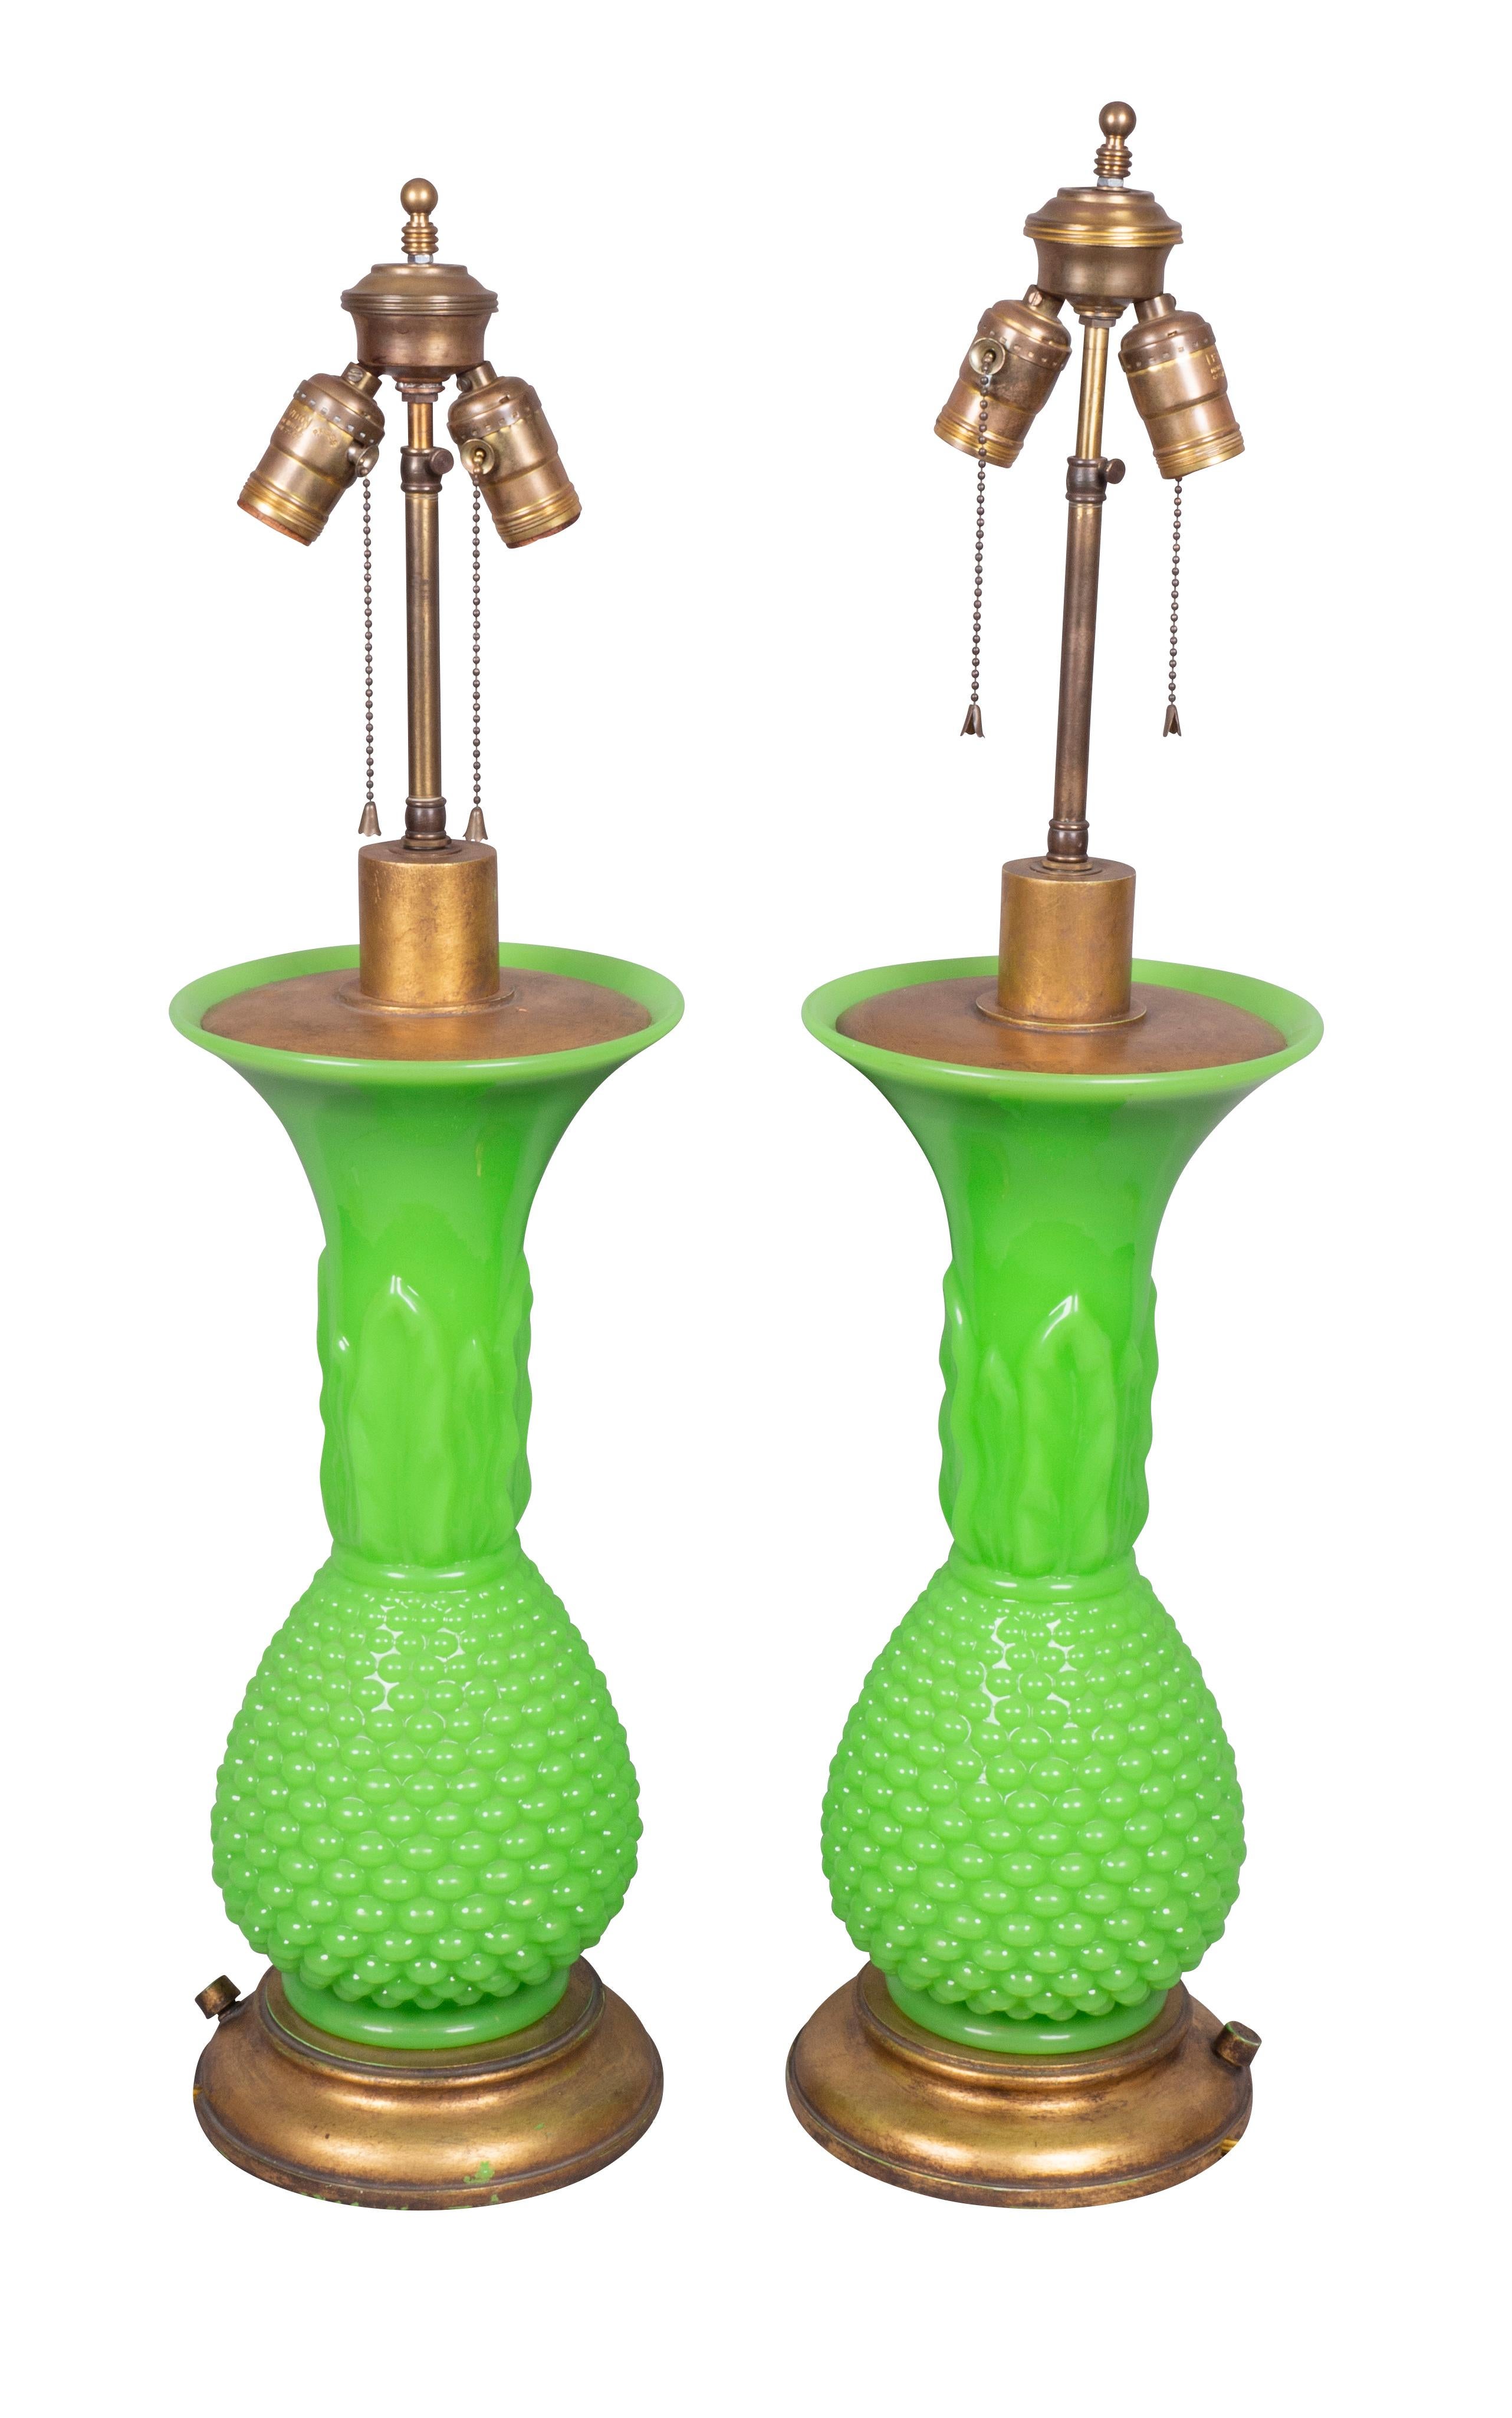 Great color with hobnail decoration with molded leaf decoration on the neck. Gilt metal bases.